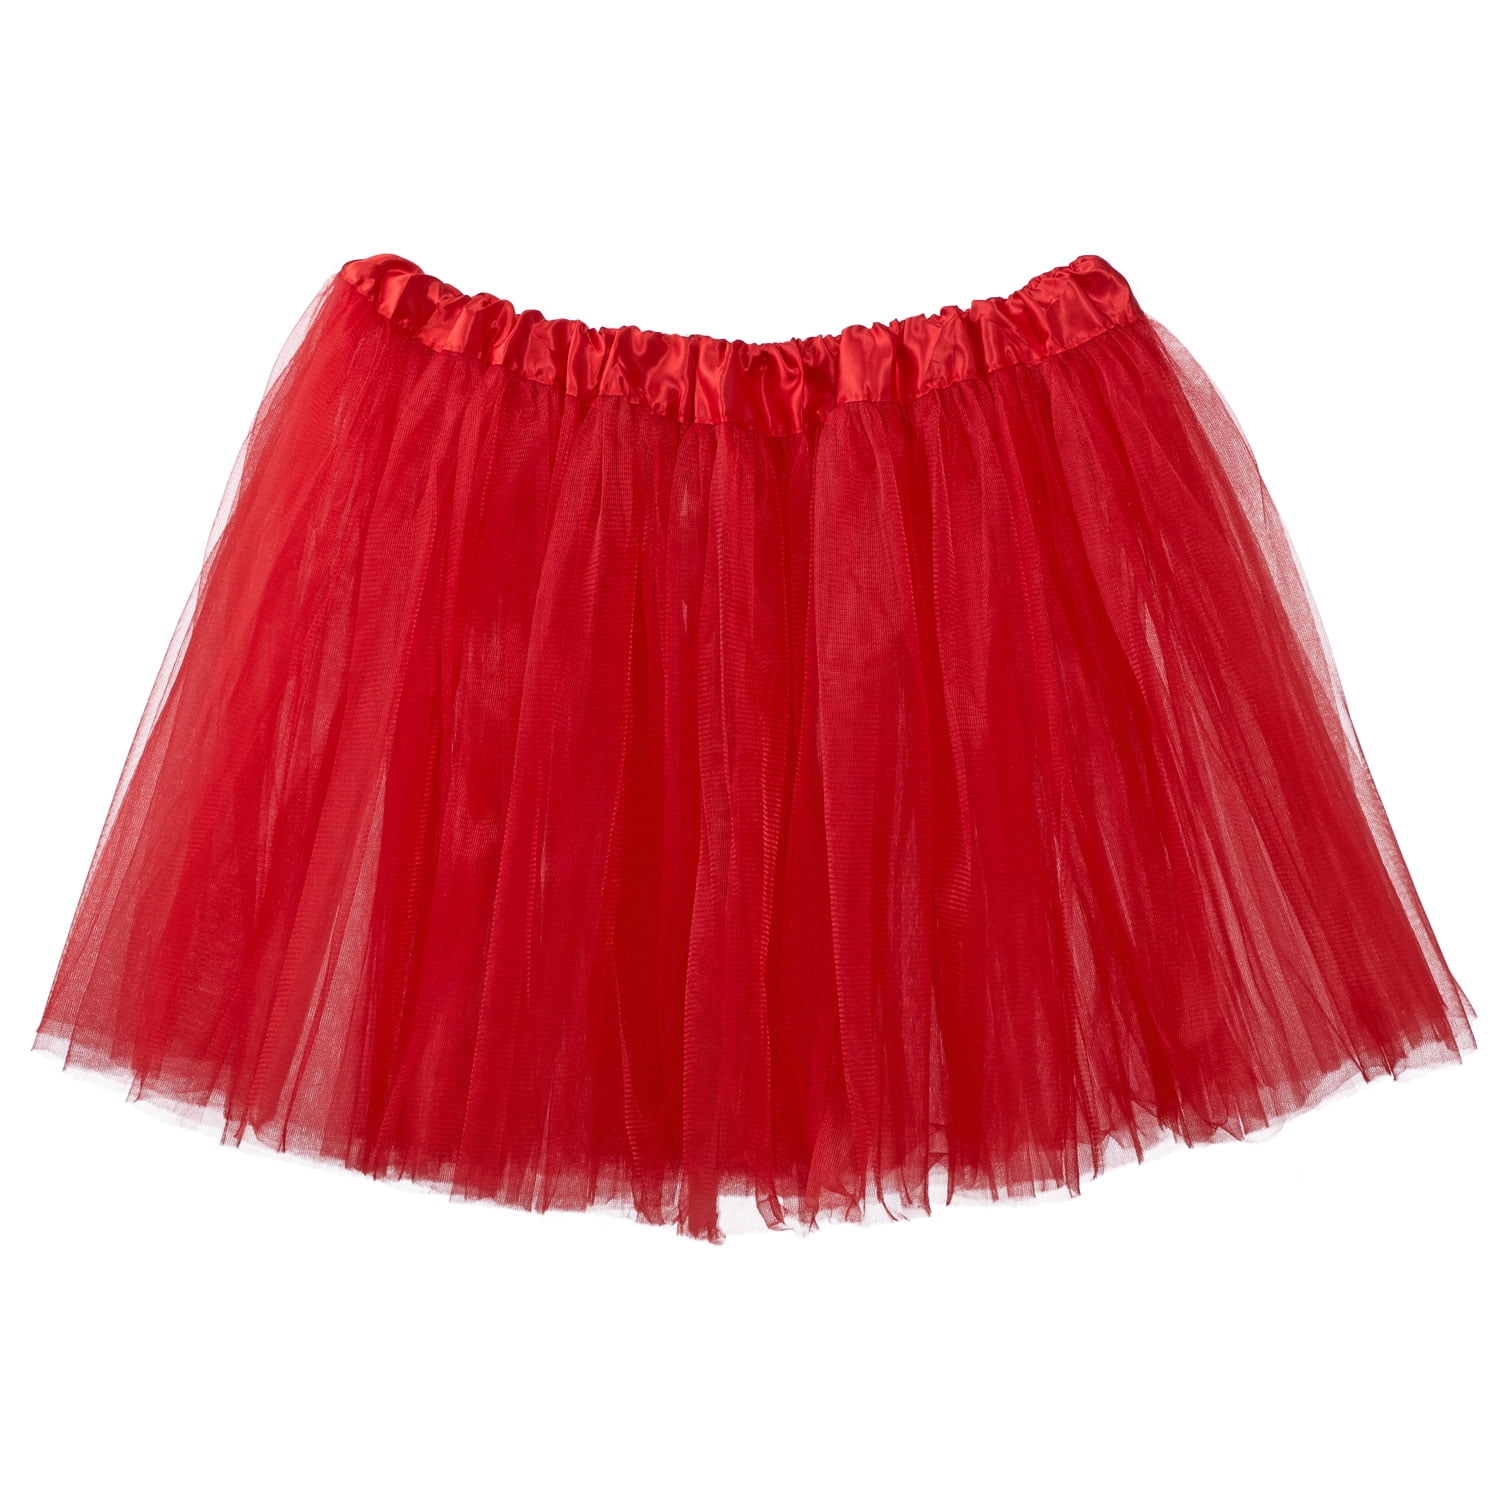 Adult Tutu Skirt, Classic 3 Layer Tulle Tutu for Women and Teens - Red Walmart.com